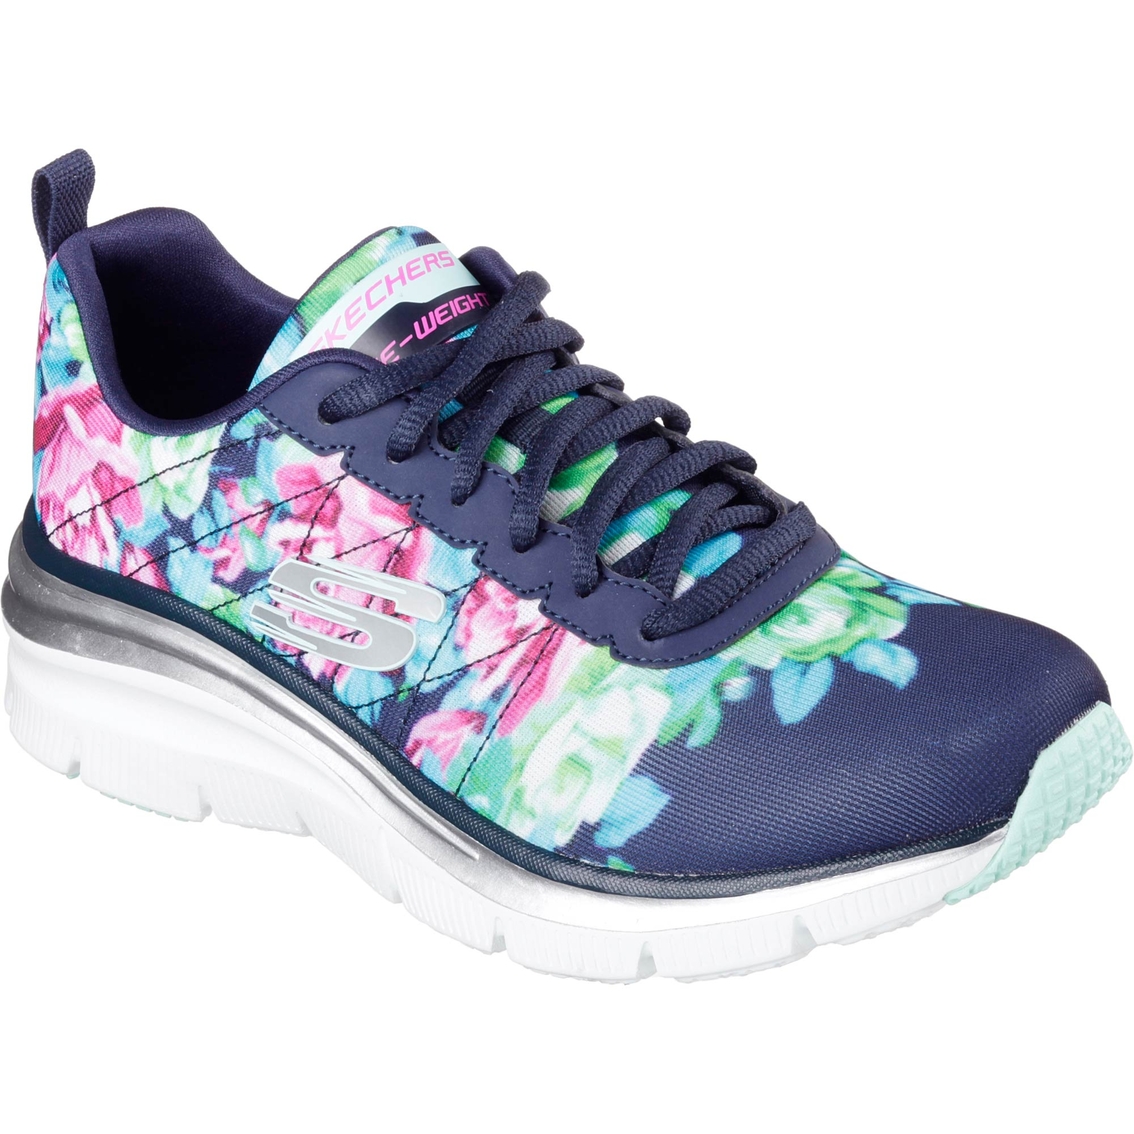 Skechers Sport Fashion Fit Floral Print Mesh Sneakers, Sneakers, Shoes